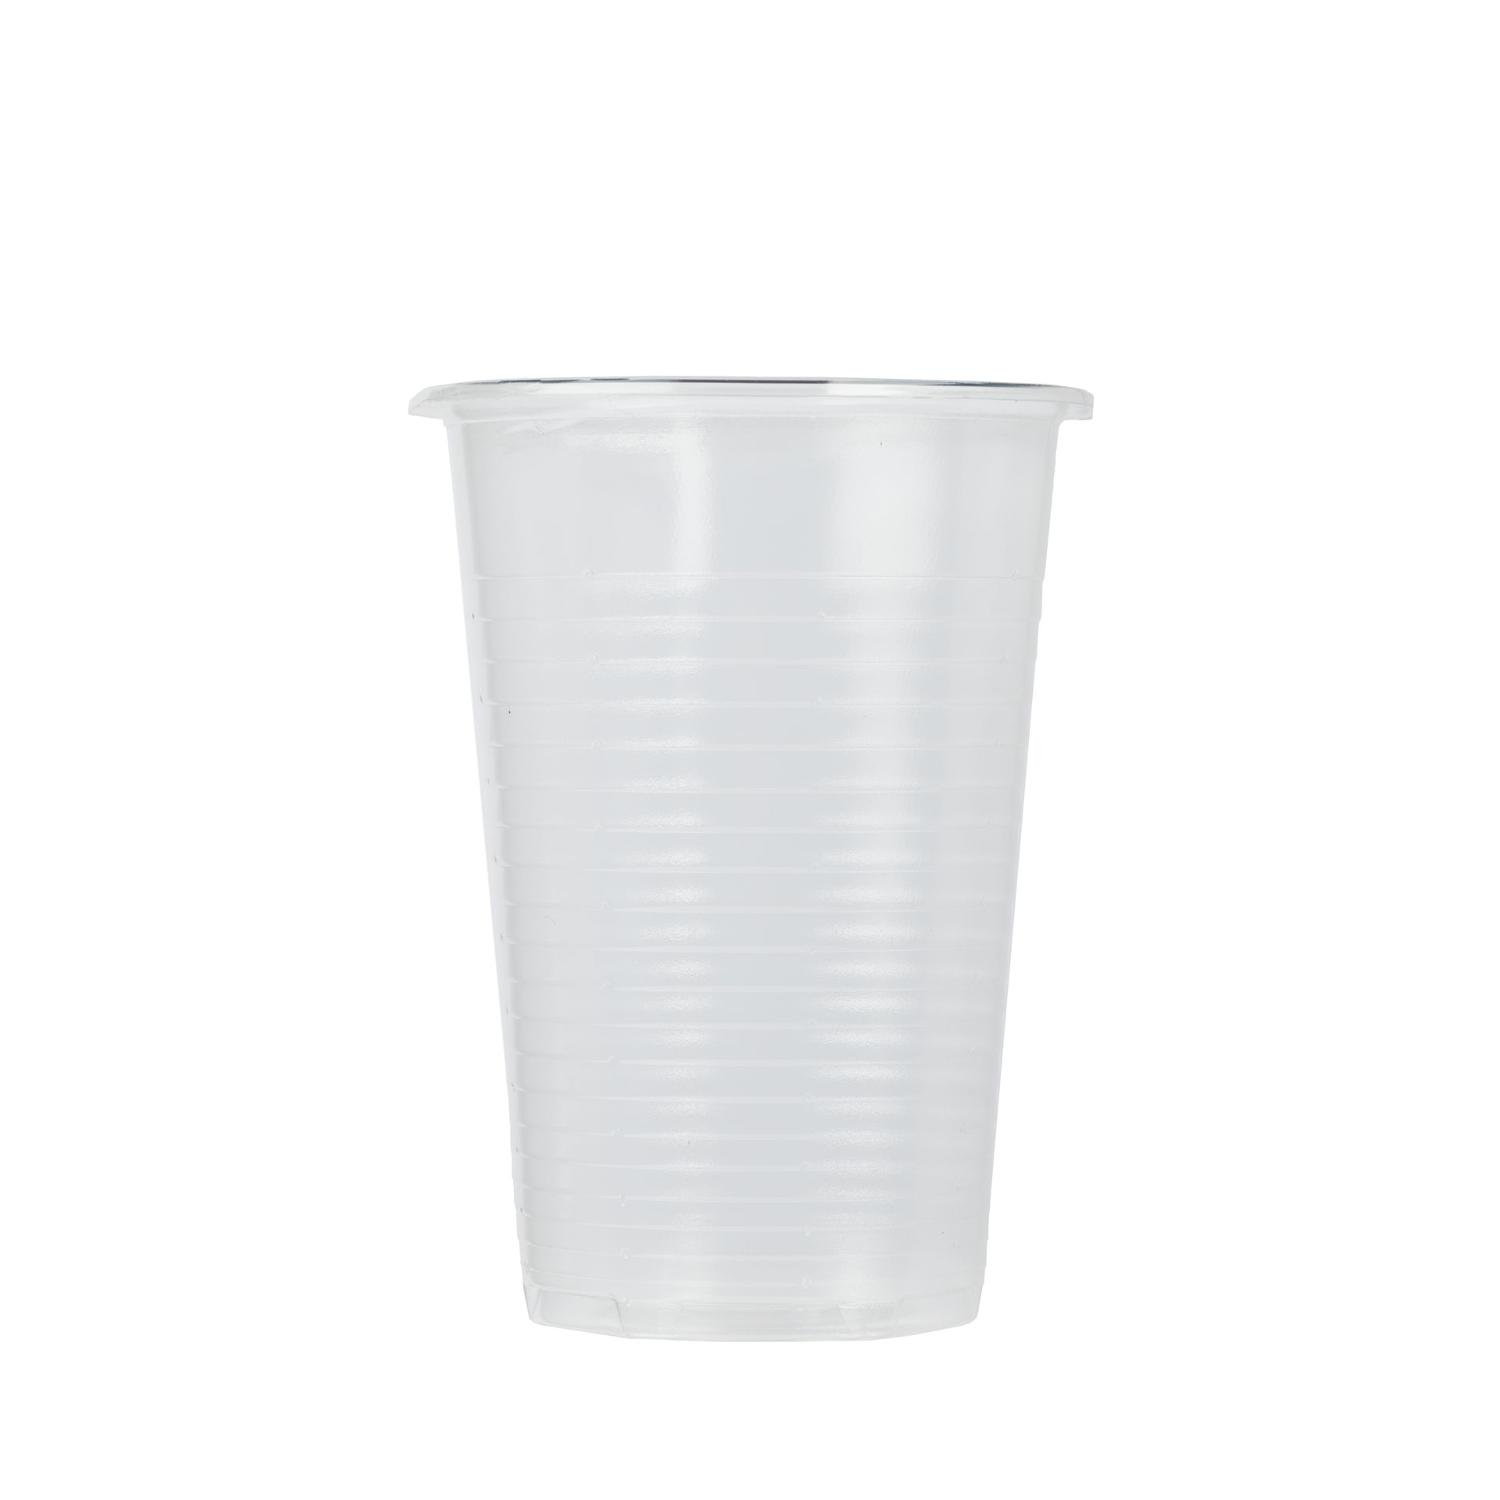 5 Oz. Clear Plastic Cups - 100 Ct.